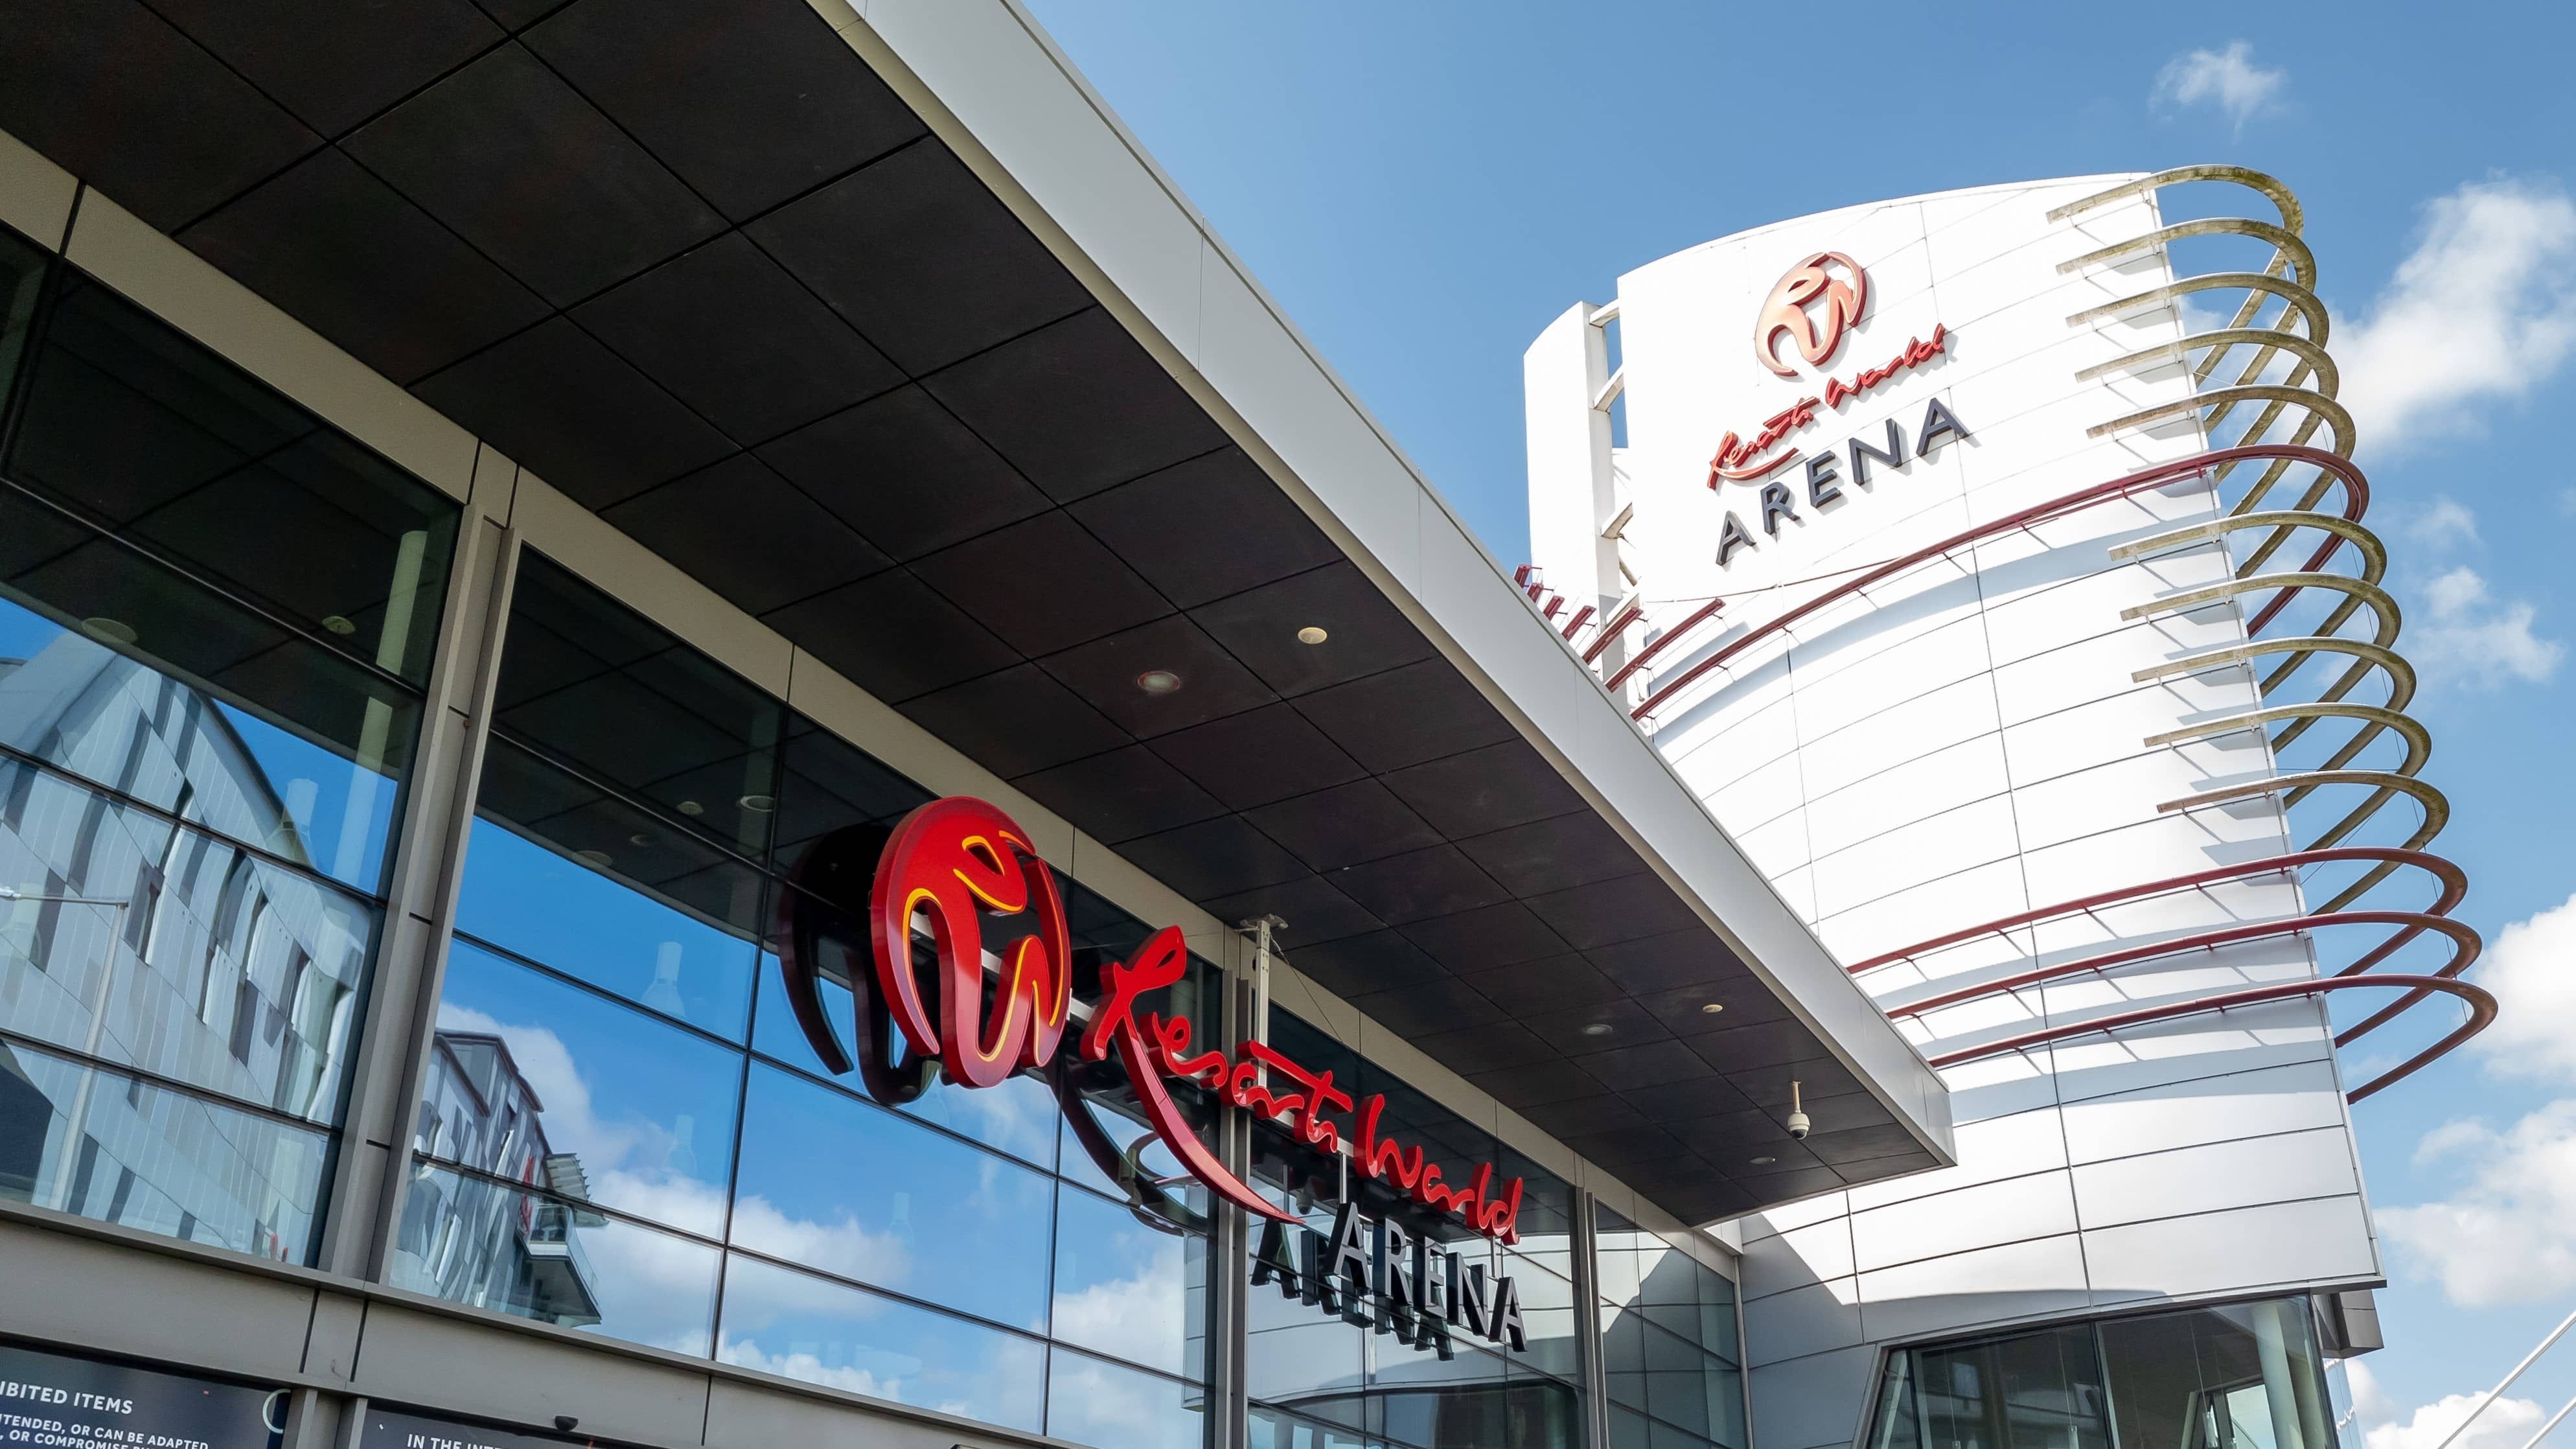 Exterior view of the Resorts World Arena located at the National Exhibition Centre area in Solihull.